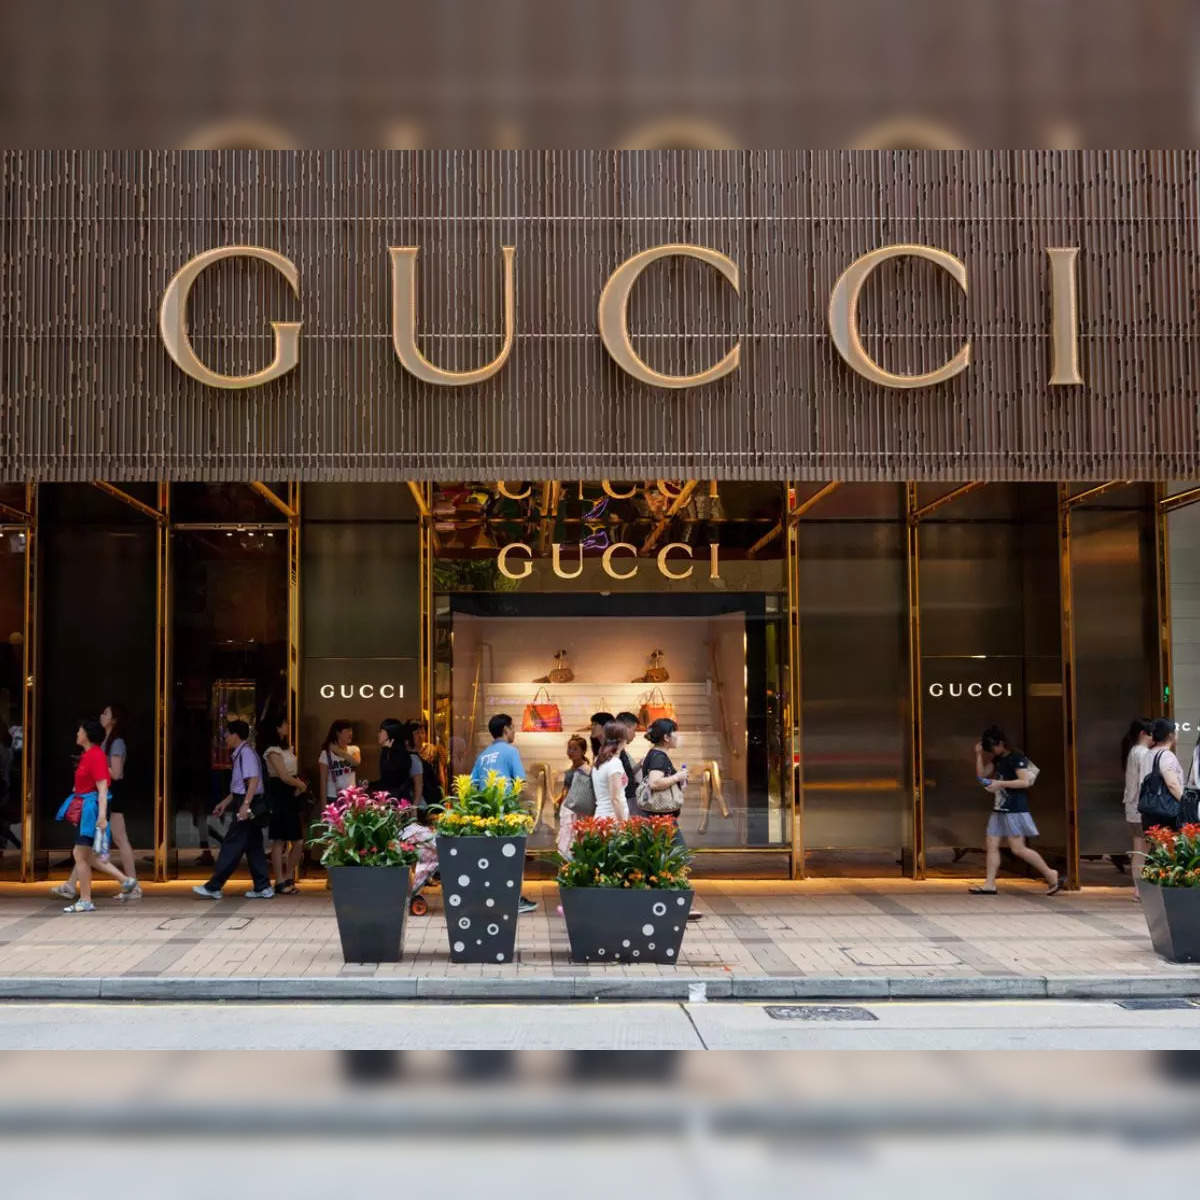 Luxury Fashion Brands Turn to Gaming to Attract New Buyers